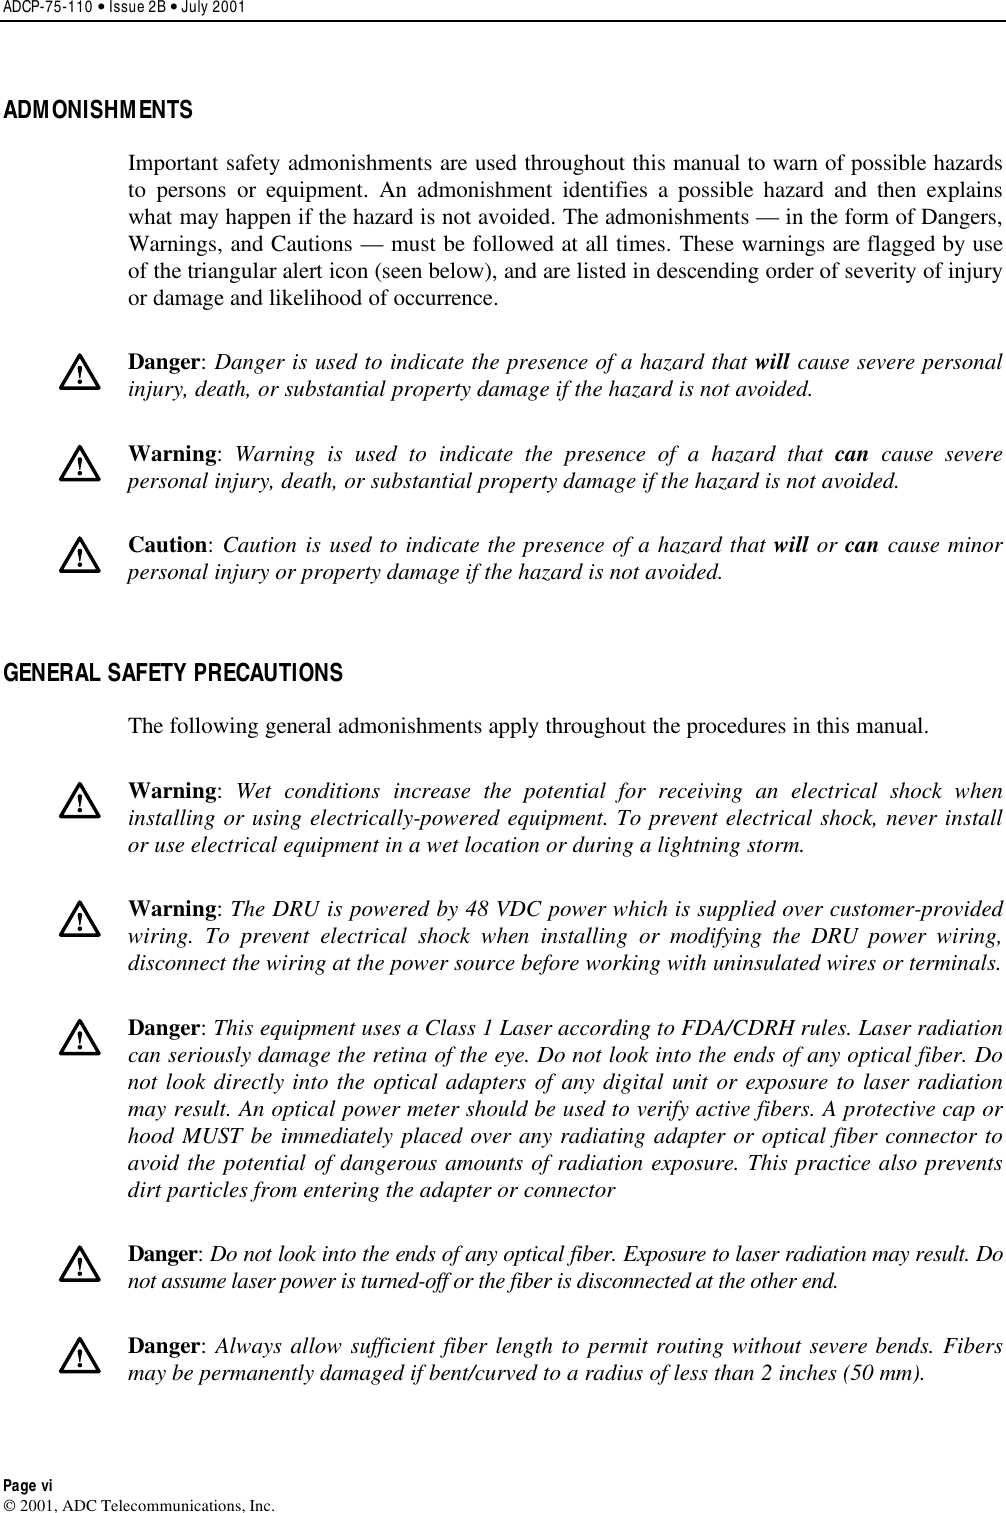 ADCP-75-110 • Issue 2B • July 2001 Page vi 2001, ADC Telecommunications, Inc.ADMONISHMENTS Important safety admonishments are used throughout this manual to warn of possible hazardsto persons or equipment. An admonishment identifies apossible hazard and then explainswhat may happen if the hazard is not avoided. The admonishments —in the form of Dangers,Warnings, and Cautions —must be followed at all times. These warnings are flagged by useof the triangular alert icon (seen below), and are listed in descending order of severity of injuryor damage and likelihood of occurrence.Danger:Danger is used to indicate the presence of a hazard that will cause severe personalinjury, death, or substantial property damage if the hazard is not avoided.Warning:Warning is used to indicate the presence of a hazard that can cause severepersonal injury, death, or substantial property damage if the hazard is not avoided.Caution:Caution is used to indicate the presence of a hazard that will or can cause minorpersonal injury or property damage if the hazard is not avoided.GENERAL SAFETY PRECAUTIONS The following general admonishments apply throughout the procedures in this manual.Warning:Wet conditions increase the potential for receiving an electrical shock wheninstalling or using electrically-powered equipment. To prevent electrical shock, never installor use electrical equipment in awet location or during alightning storm.Warning:The DRU is powered by 48 VDC power which is supplied over customer-providedwiring. To prevent electrical shock when installing or modifying the DRU power wiring,disconnect the wiring at the power source before working with uninsulated wires or terminals.Danger:This equipment uses aClass 1Laser according to FDA/CDRH rules. Laser radiationcan seriously damage the retina of the eye. Do not look into the ends of any optical fiber. Donot look directly into the optical adapters of any digital unit or exposure to laser radiationmay result. An optical power meter should be used to verify active fibers. Aprotective cap orhood MUST be immediately placed over any radiating adapter or optical fiber connector toavoid the potential of dangerous amounts of radiation exposure. This practice also preventsdirt particles from entering the adapter or connectorDanger:Do not look into the ends of any optical fiber. Exposure to laser radiation may result. Donot assume laser power is turned-off or the fiber is disconnected at the other end.Danger:Always allow sufficient fiber length to permit routing without severe bends. Fibersmay be permanently damaged if bent/curved to aradius of less than 2inches (50 mm).